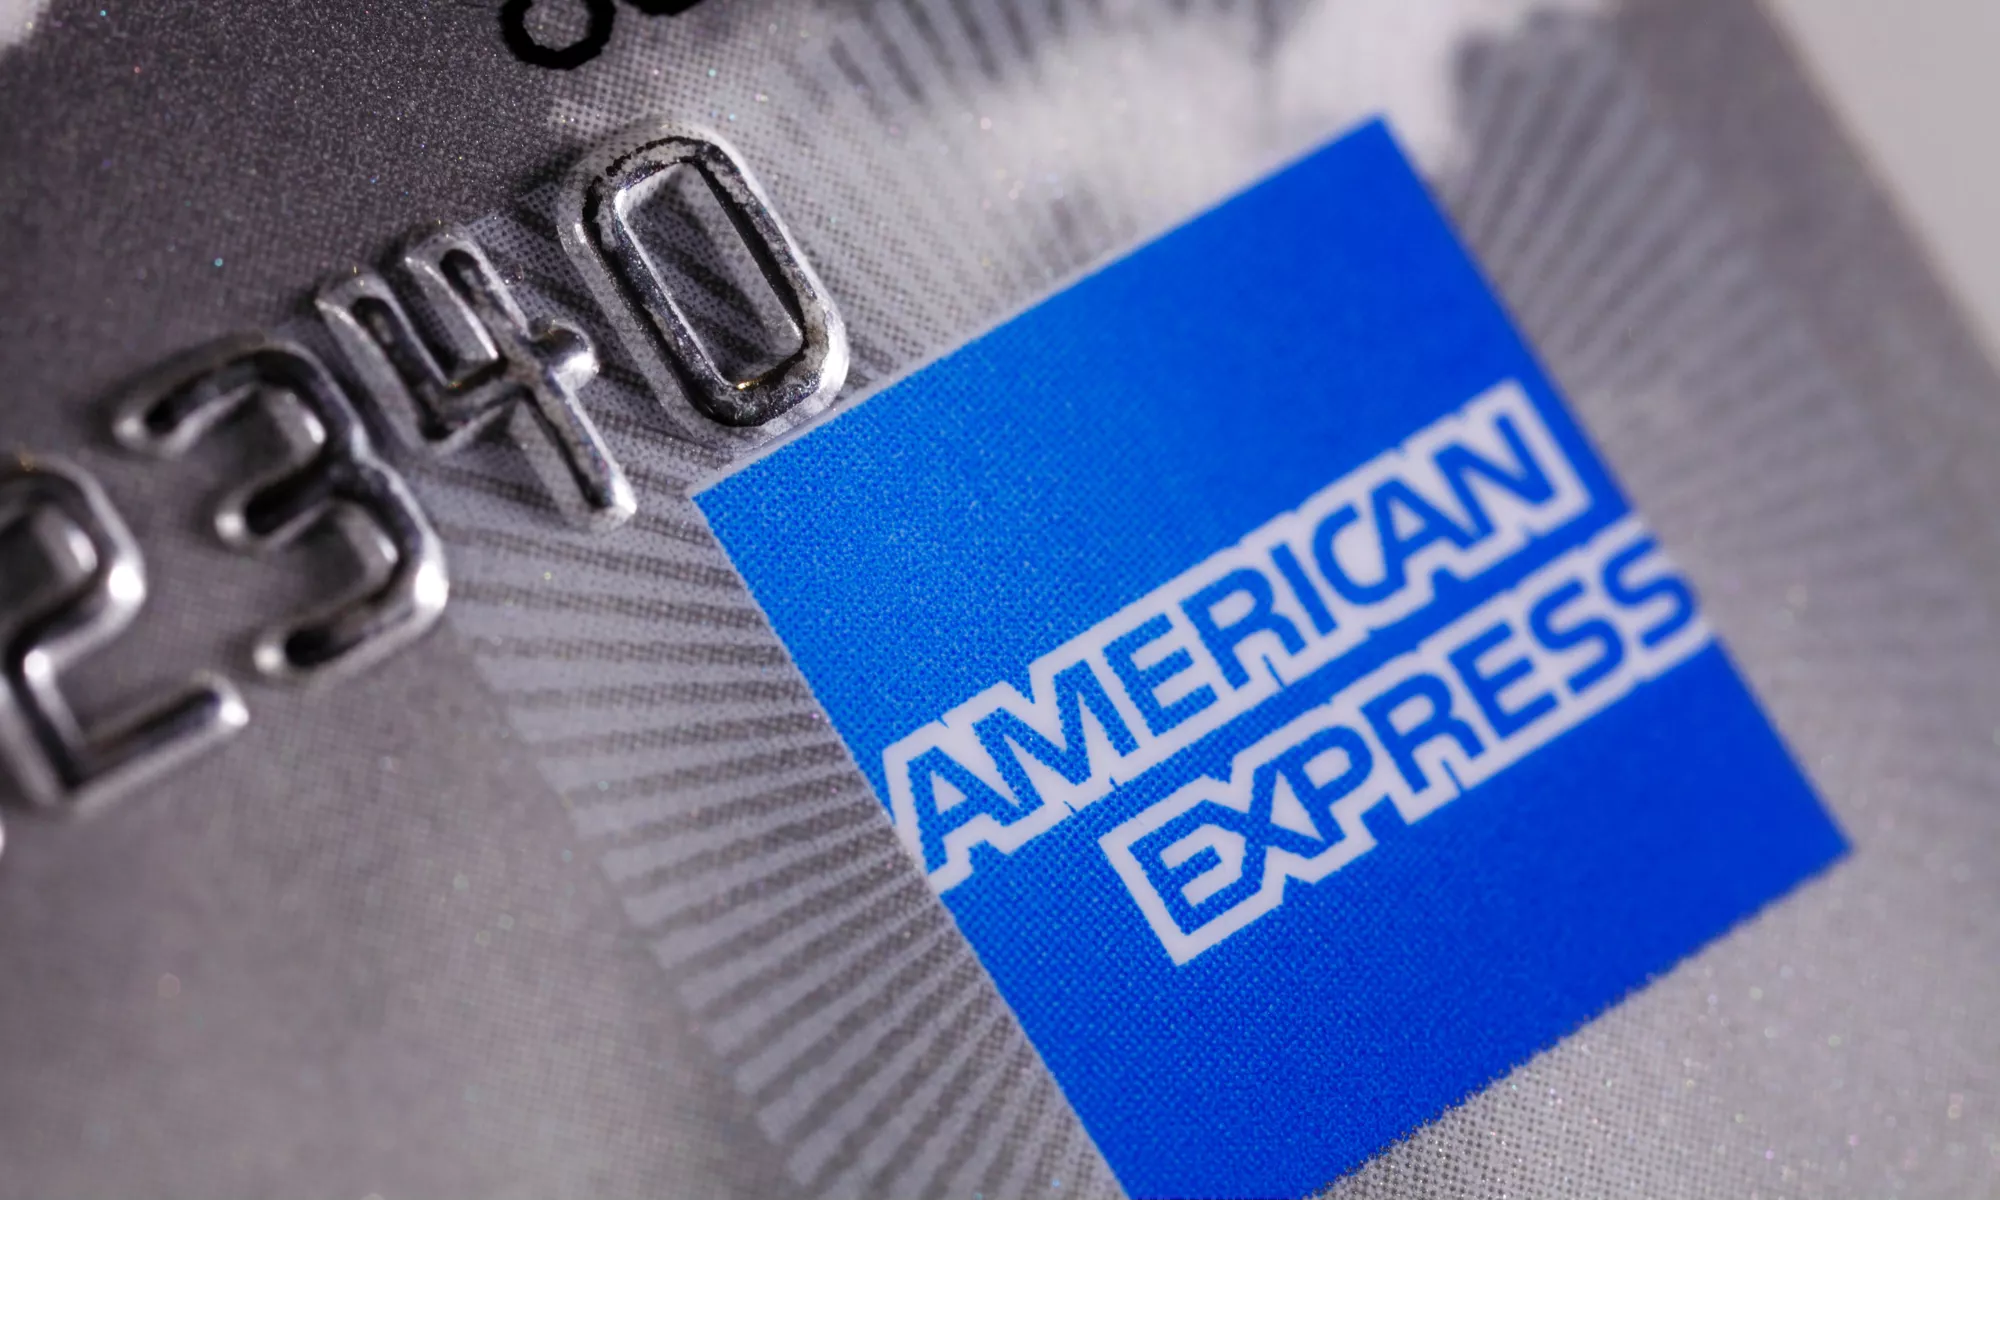 picture of an American Express credit card to represent an American Express chargeback